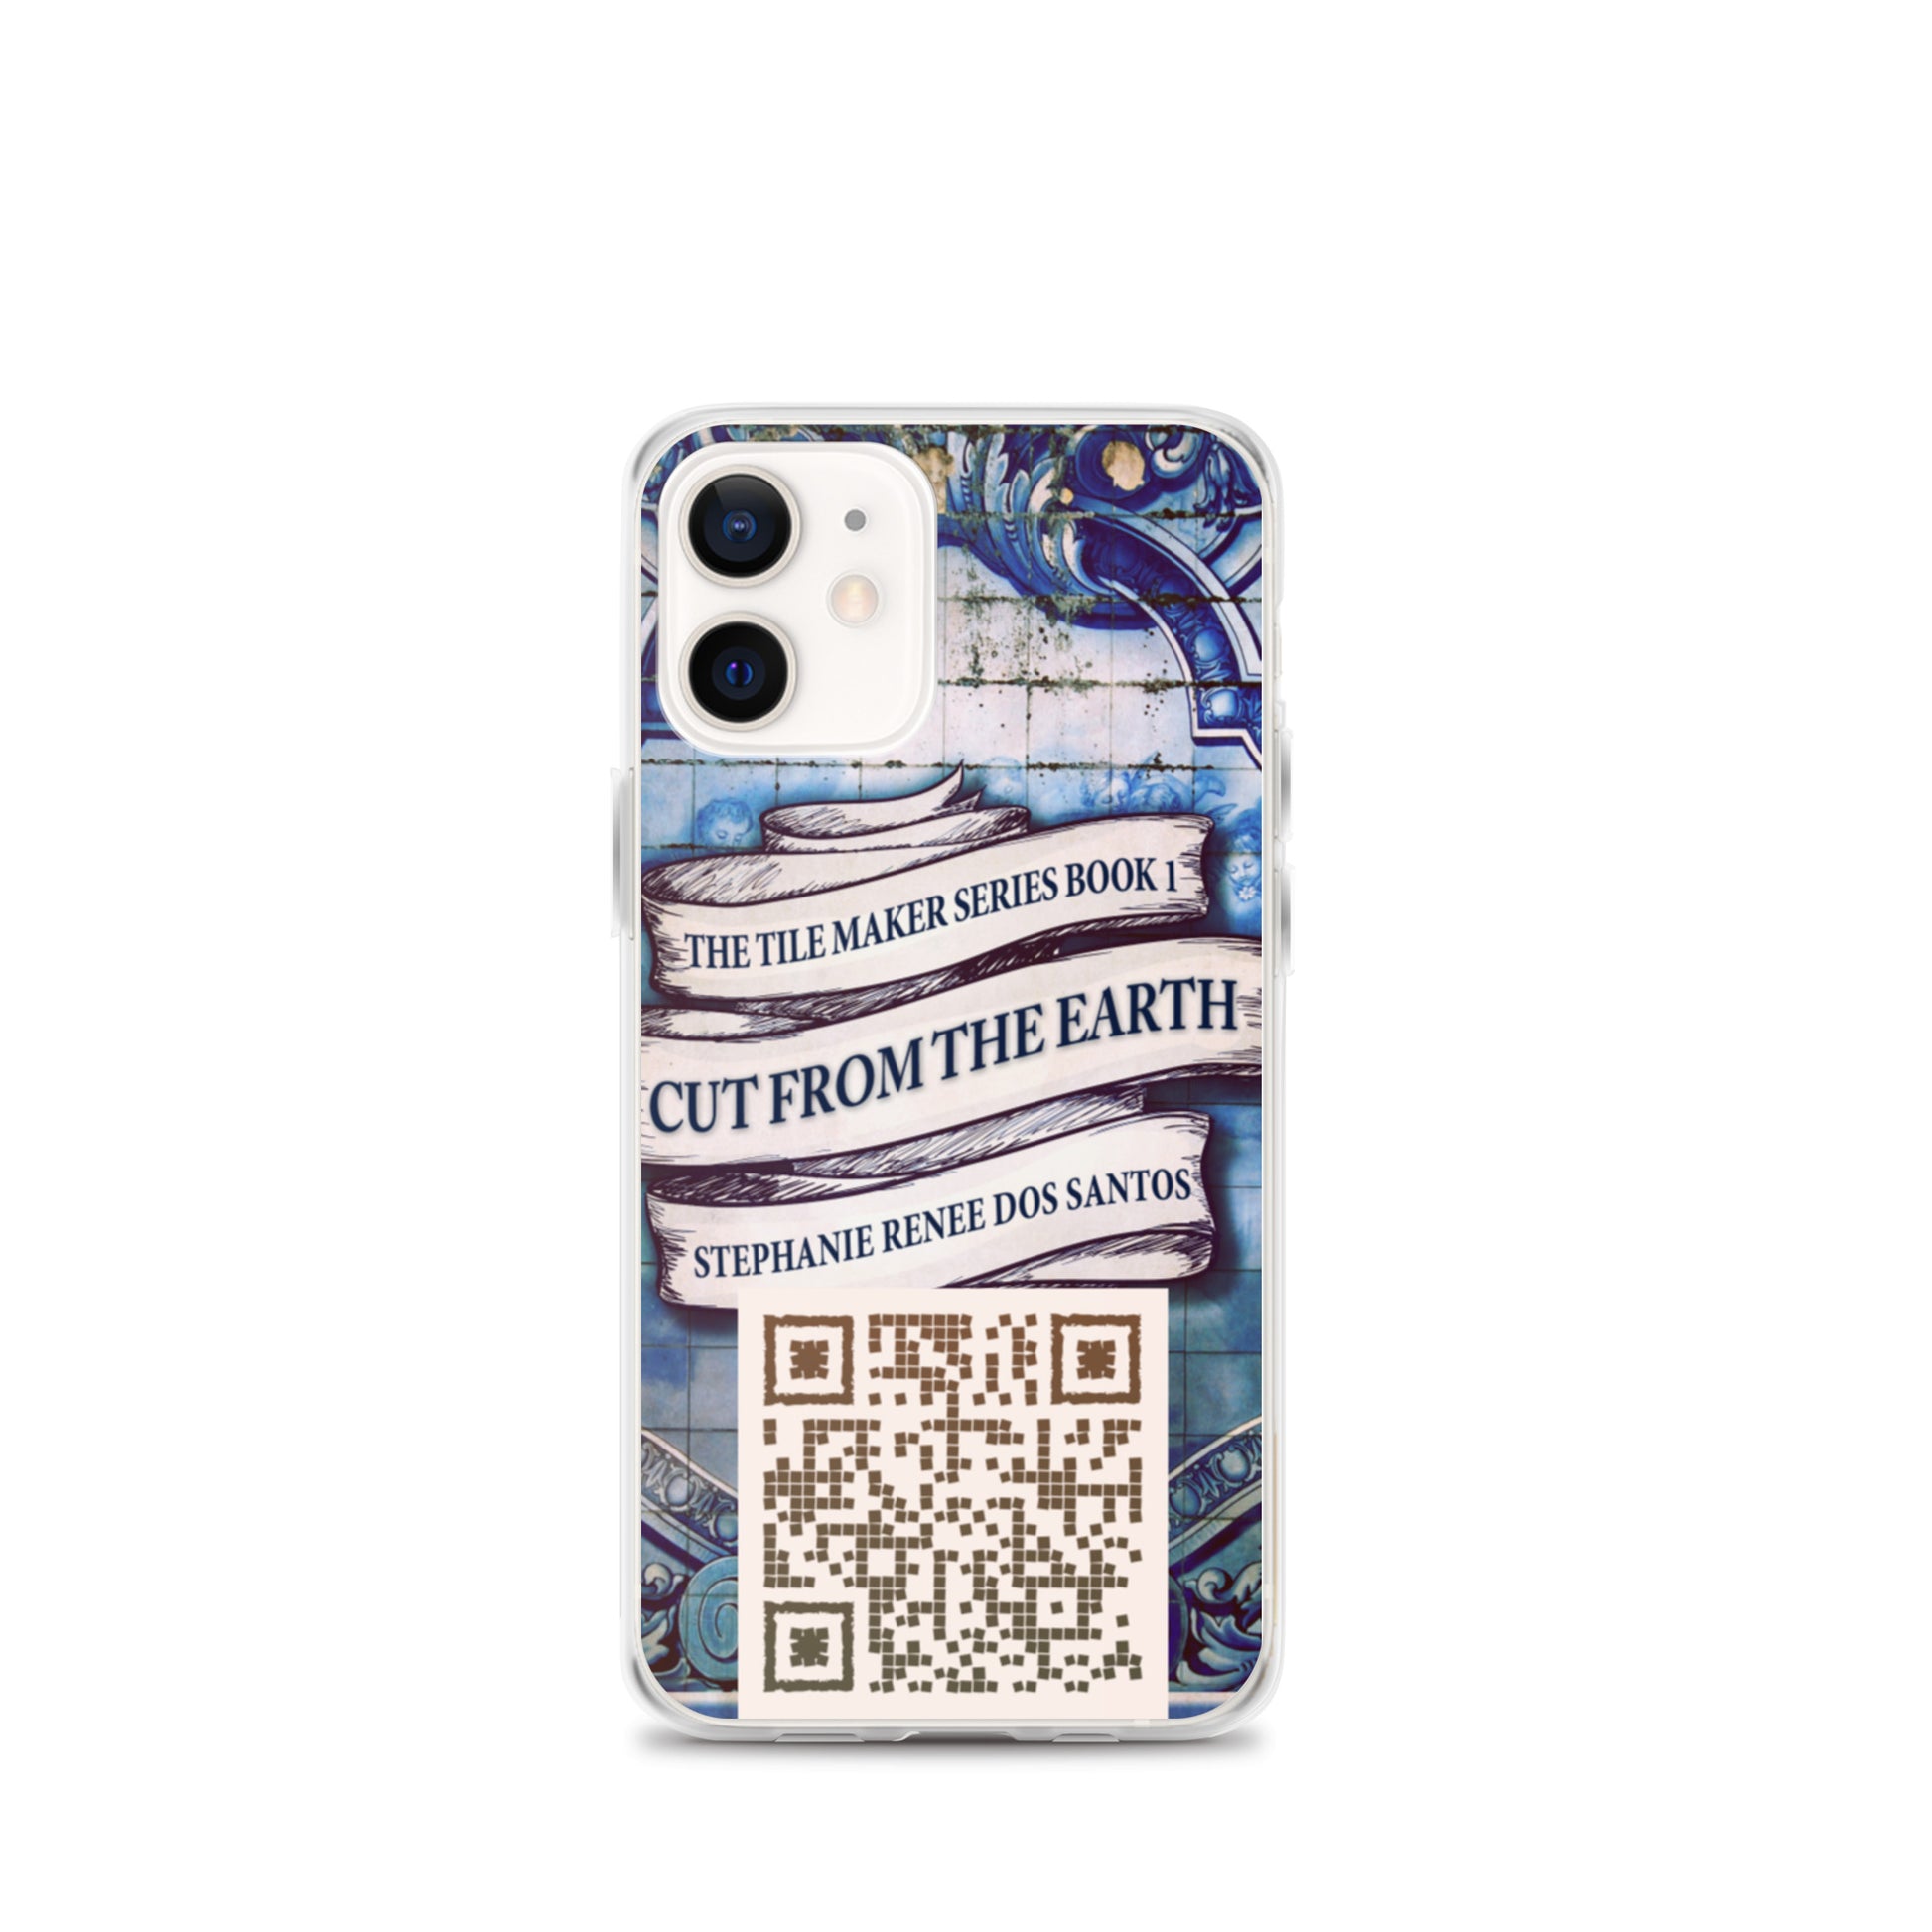 iphone case with cover of Stephanie Renee Dos Santos's book Cut From The Earth